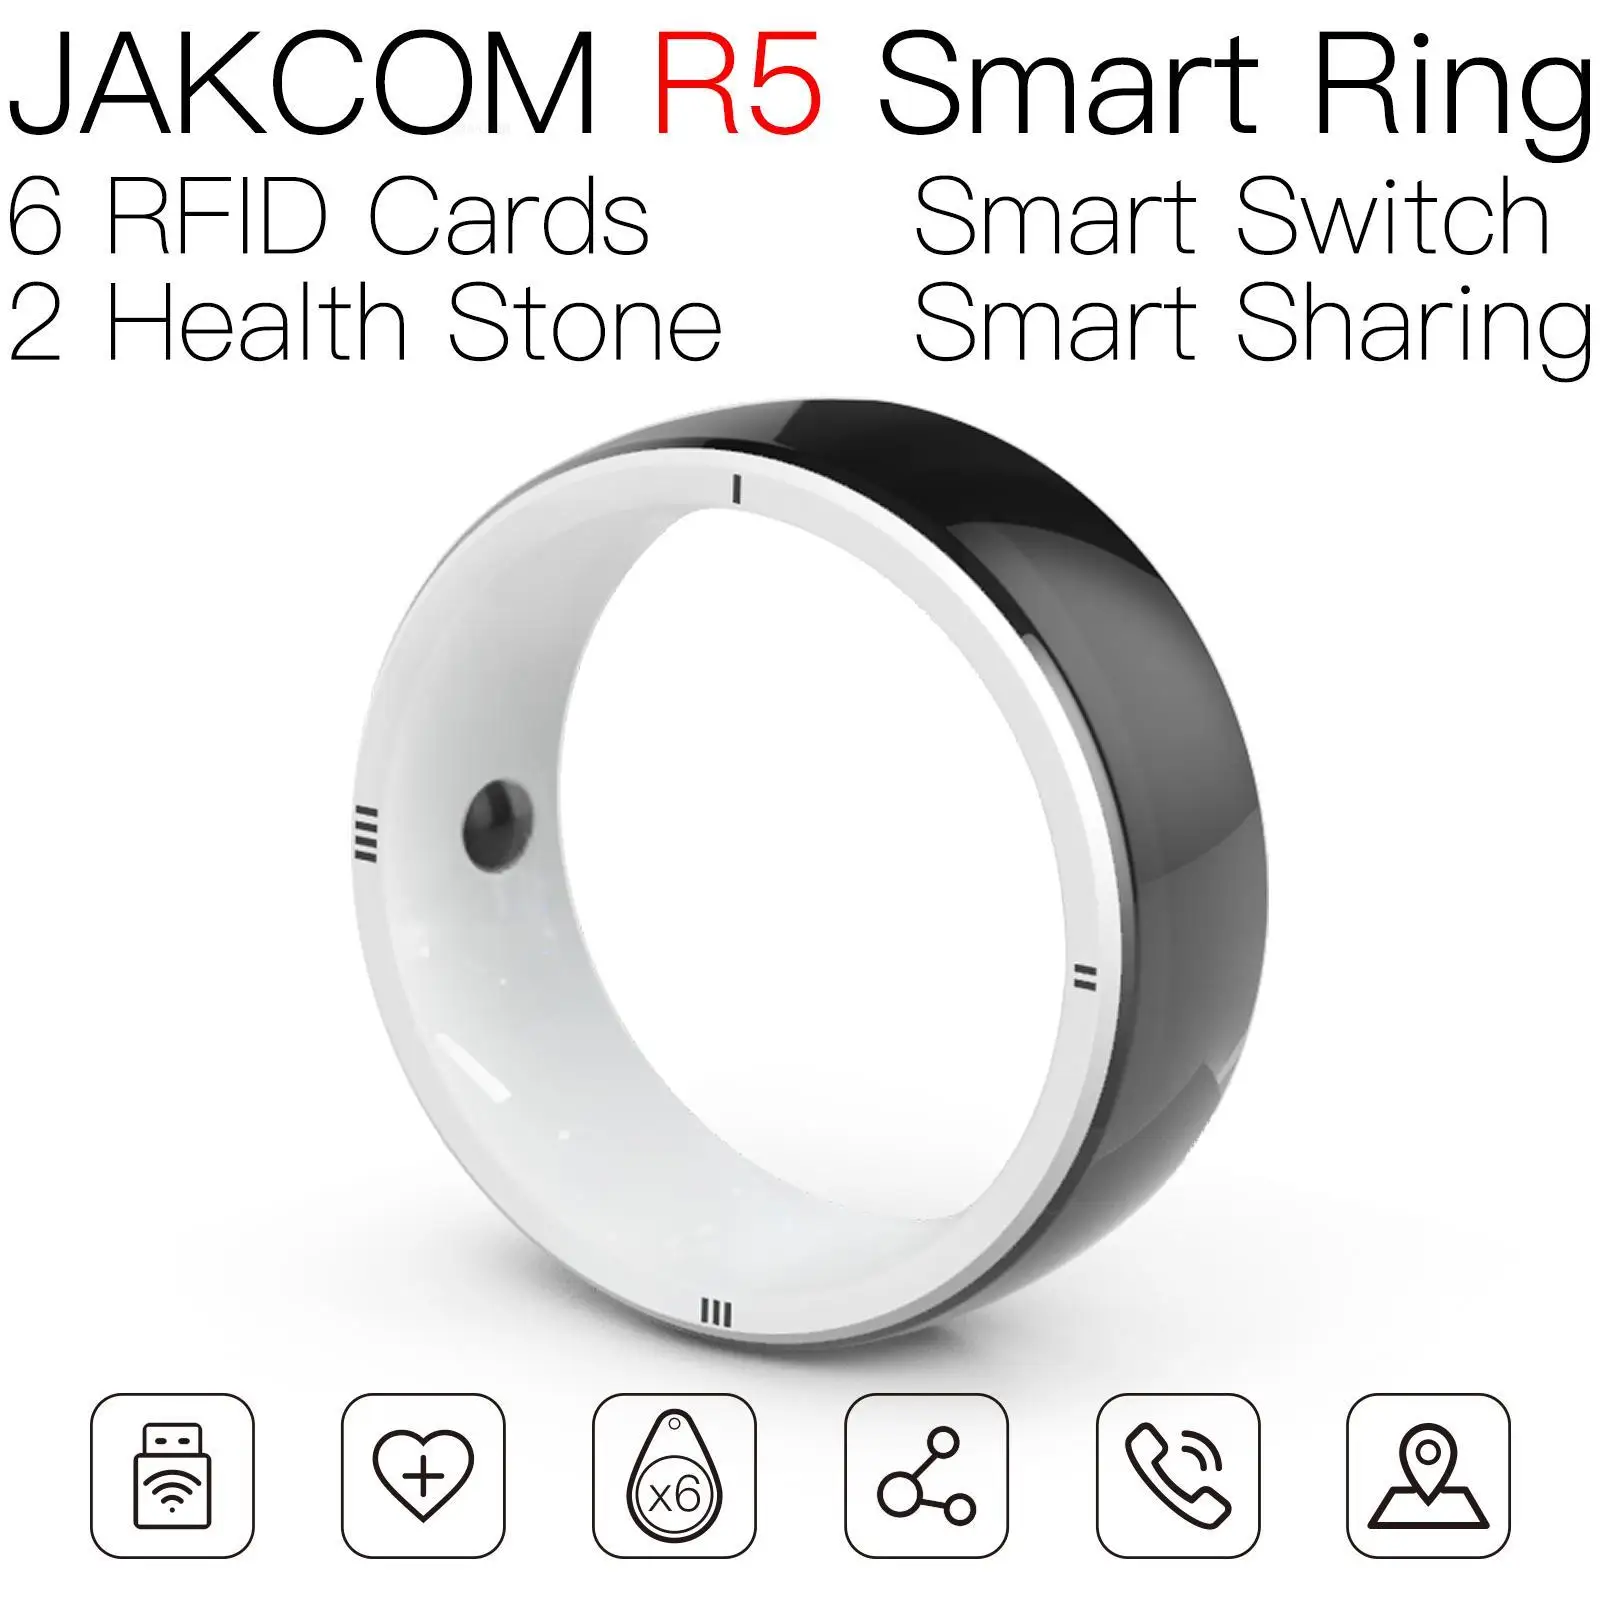 

JAKCOM R5 Smart Ring For men women mobile tags atria rfid implant fern khz label security 2 rupees wacaco official store lucky